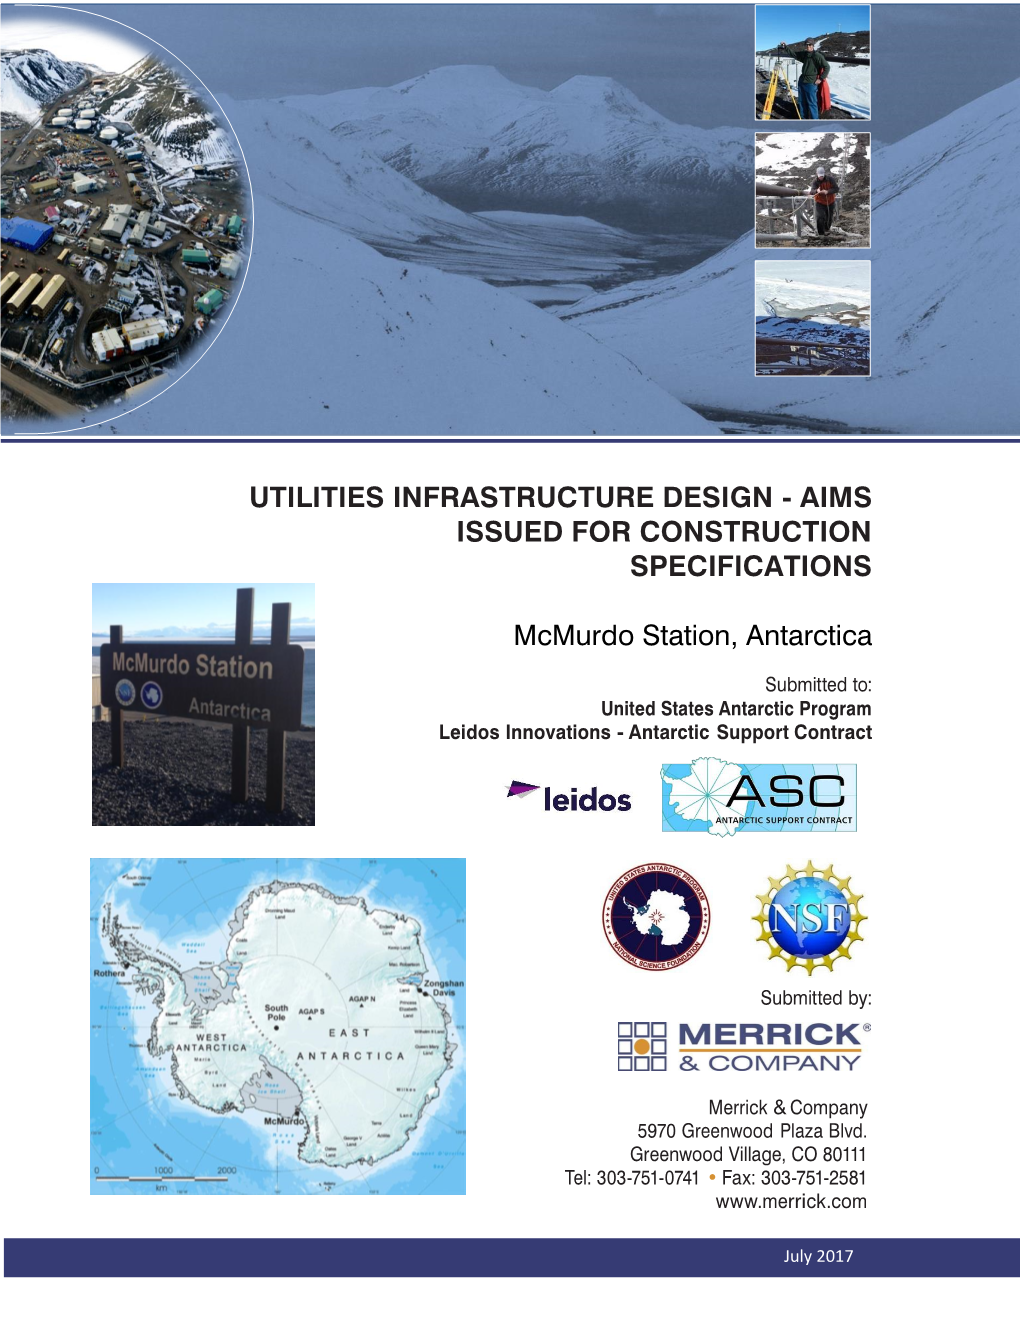 Utilities Infrastructure Design - Aims Issued for Construction Specifications